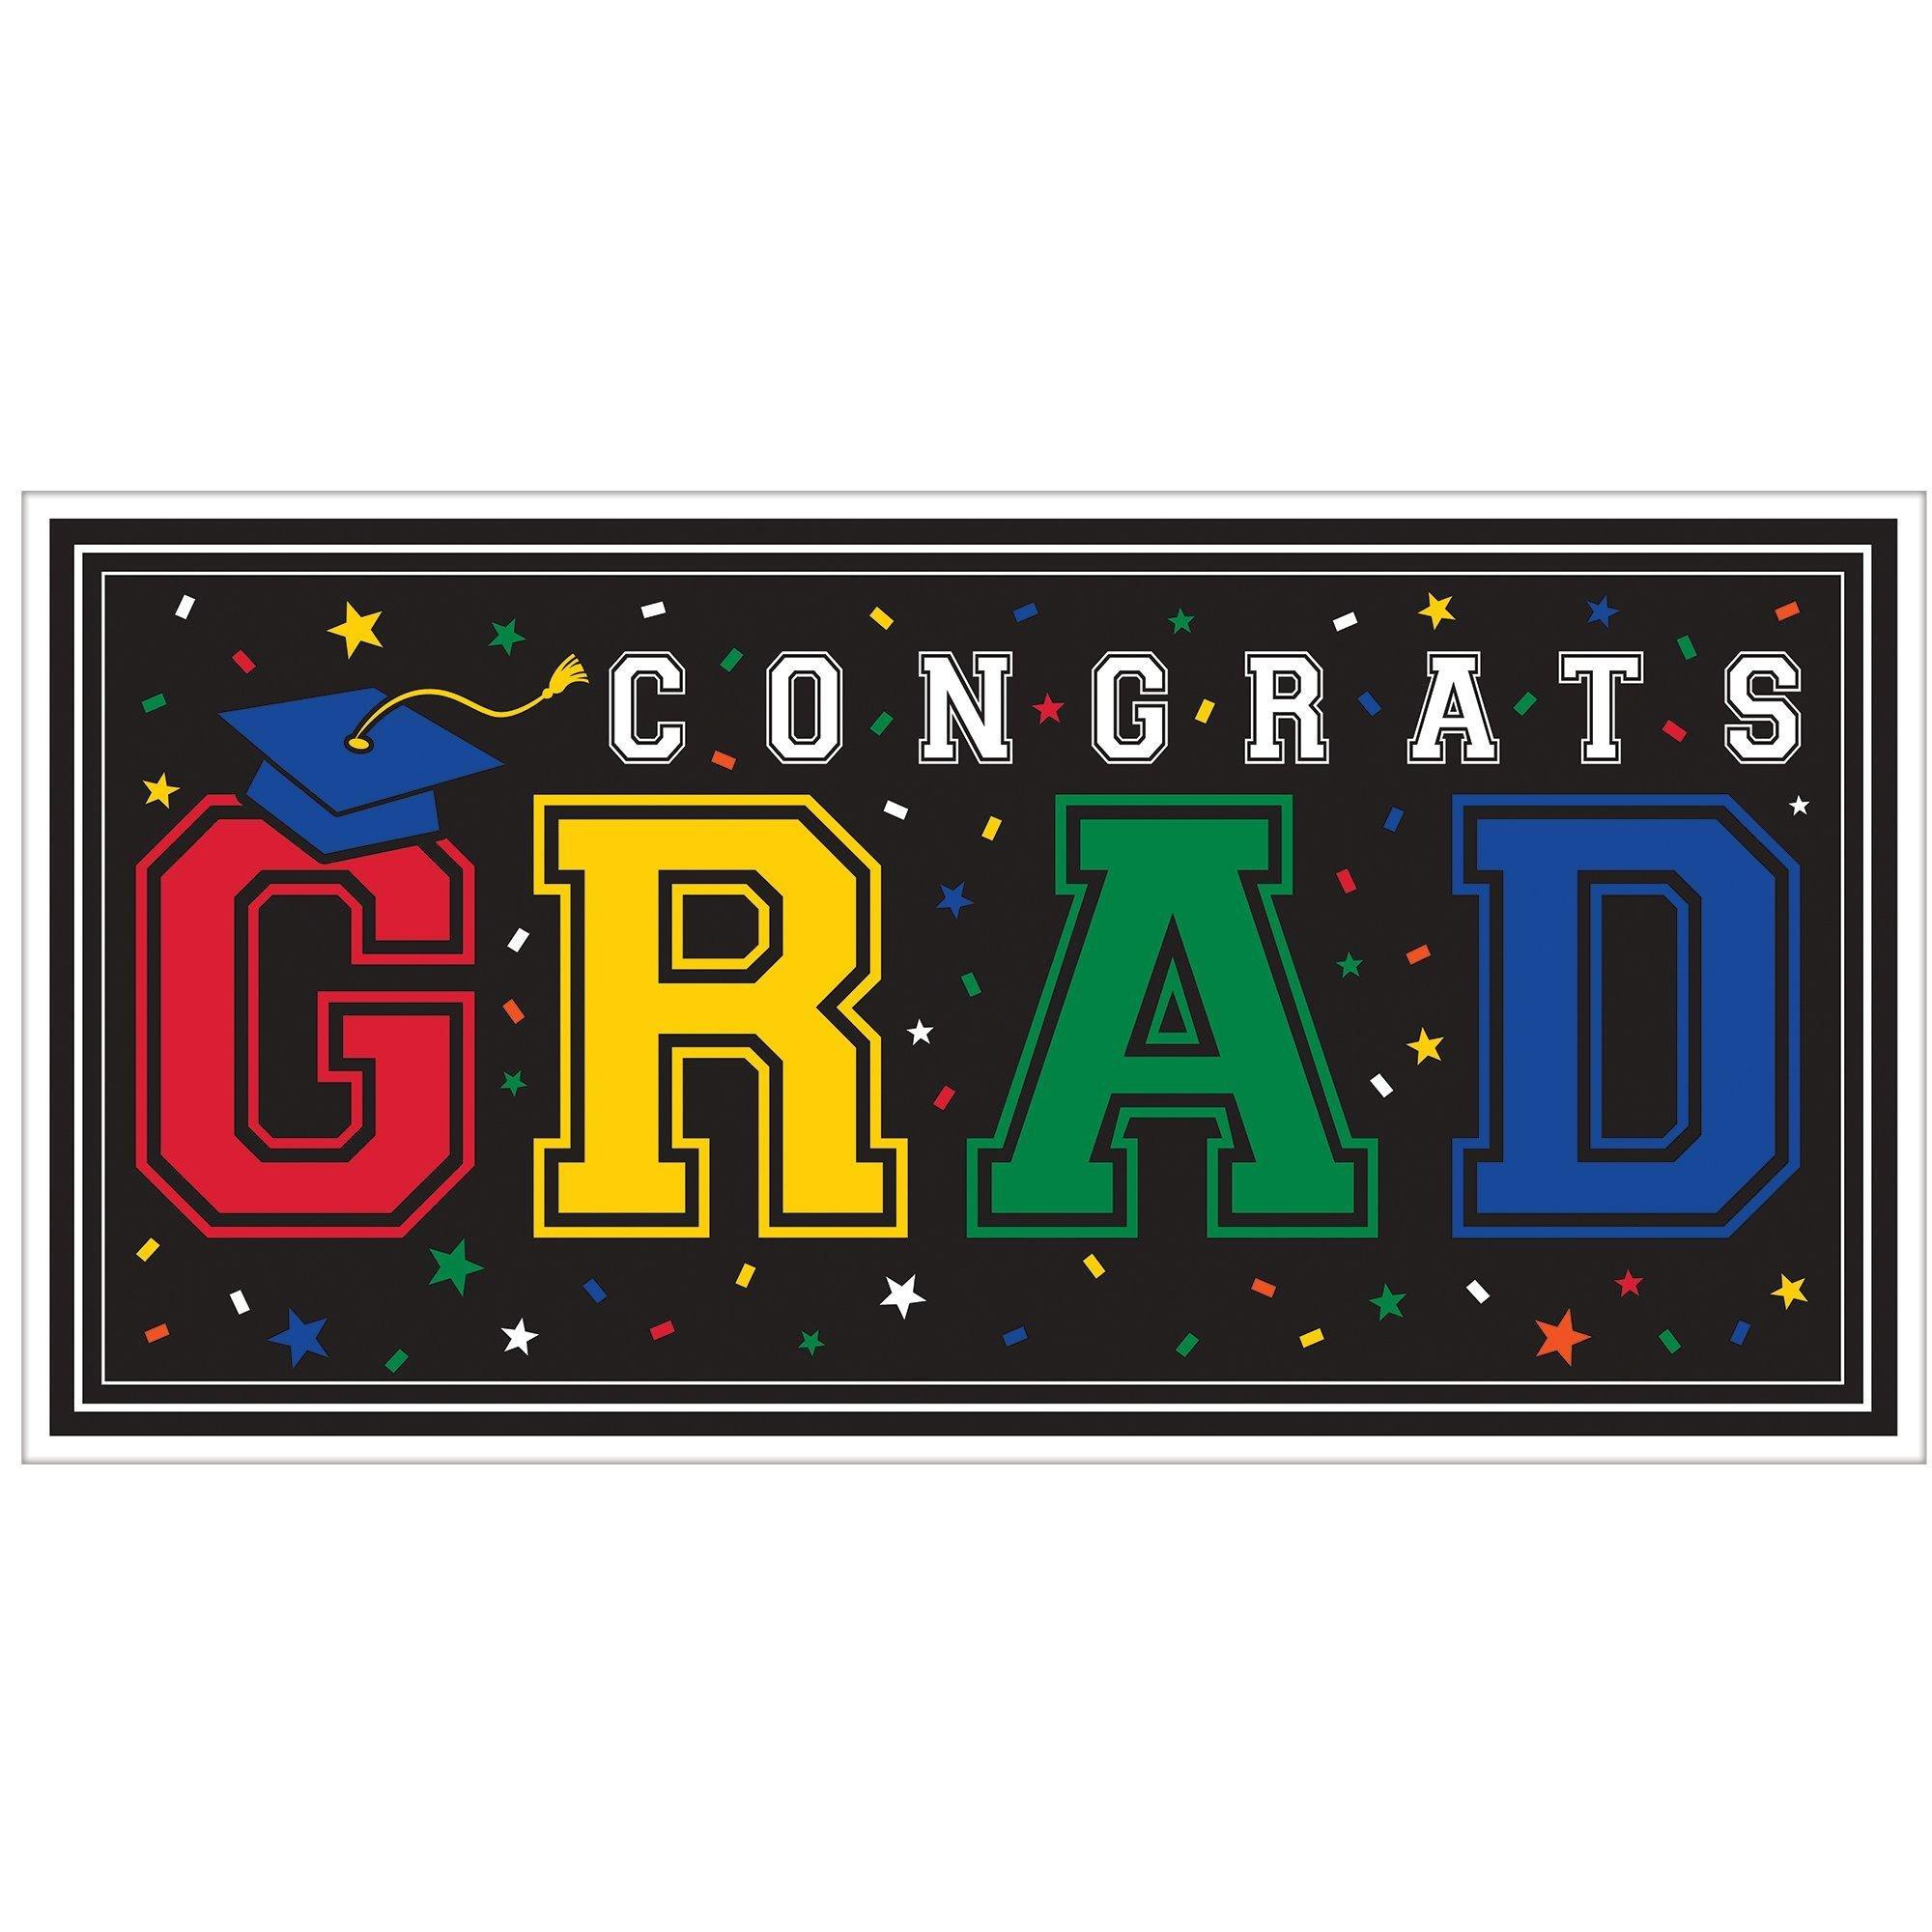 Graduation Party Decorations Kit with Banners, Balloons, Centerpiece, Streamers - Purple 2024 Congrats Grad